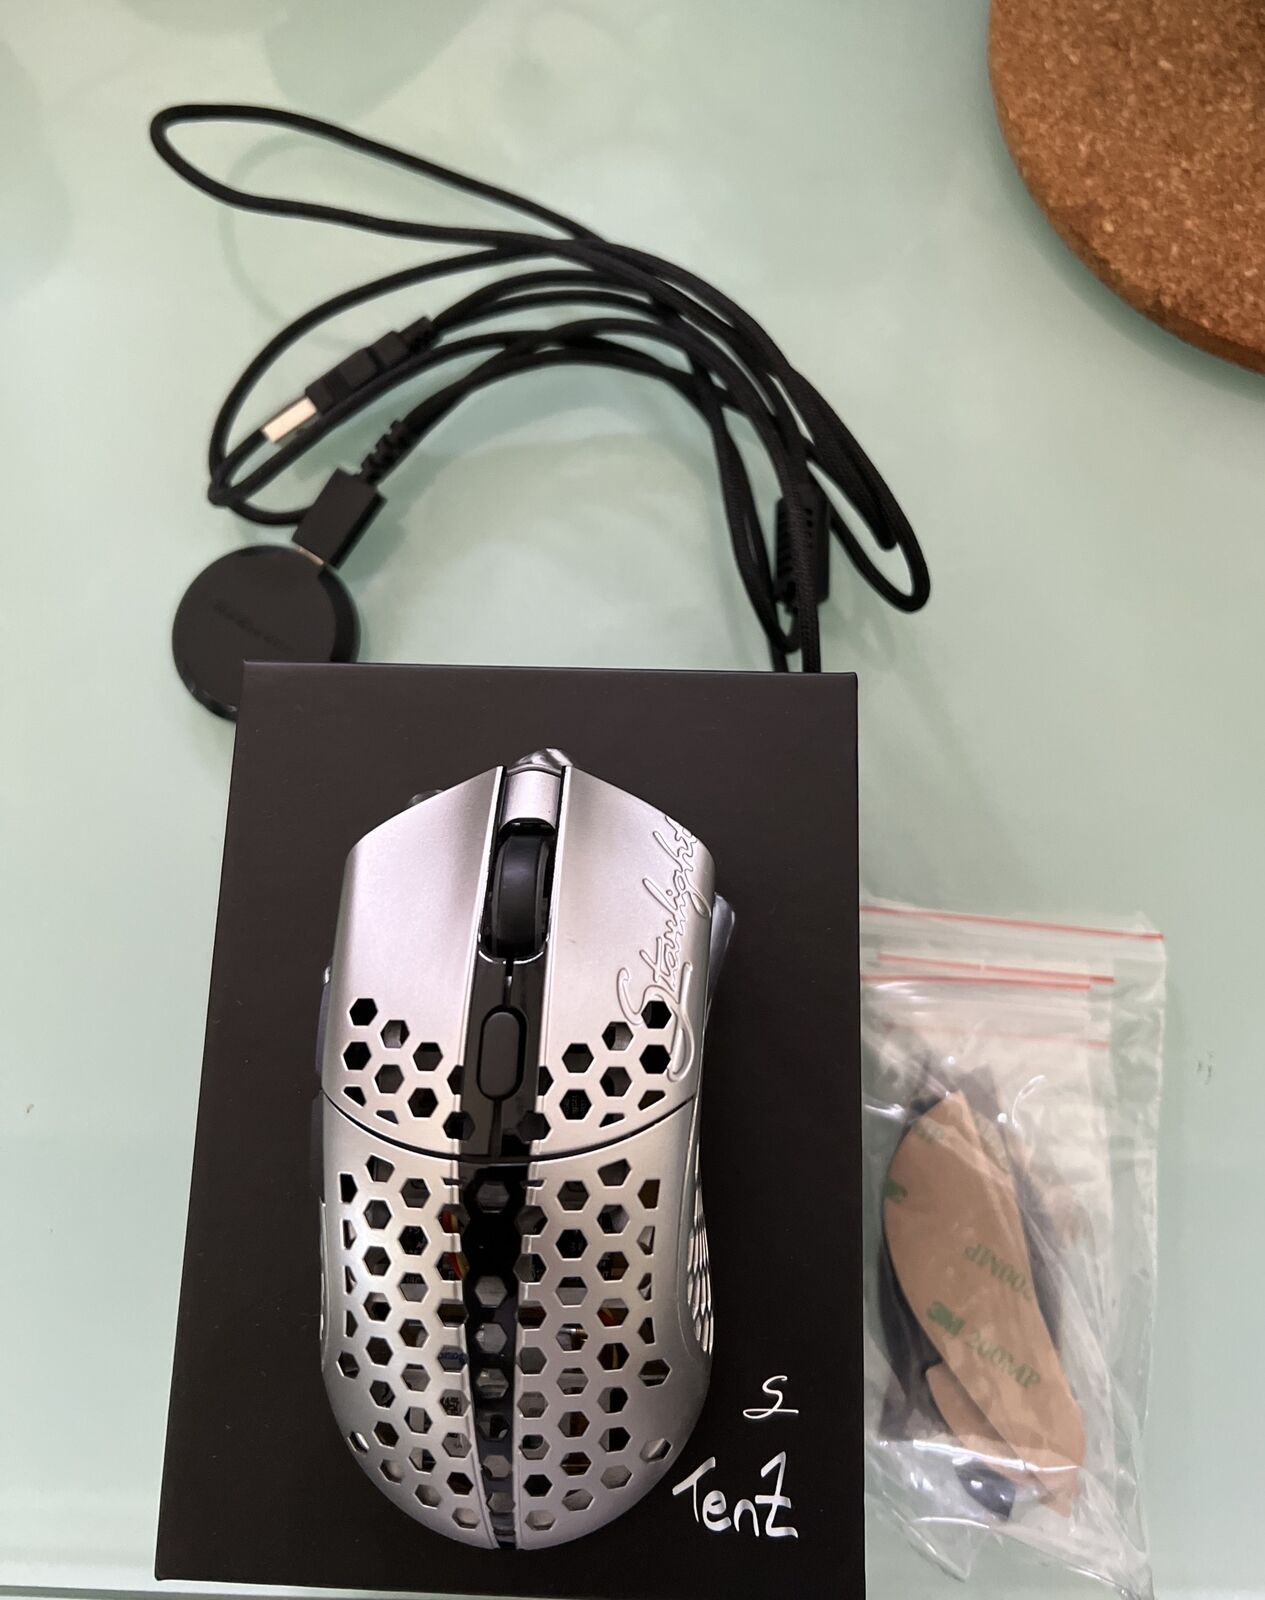 Finalmouse Starlight Pro TenZ Small (Great Condition)